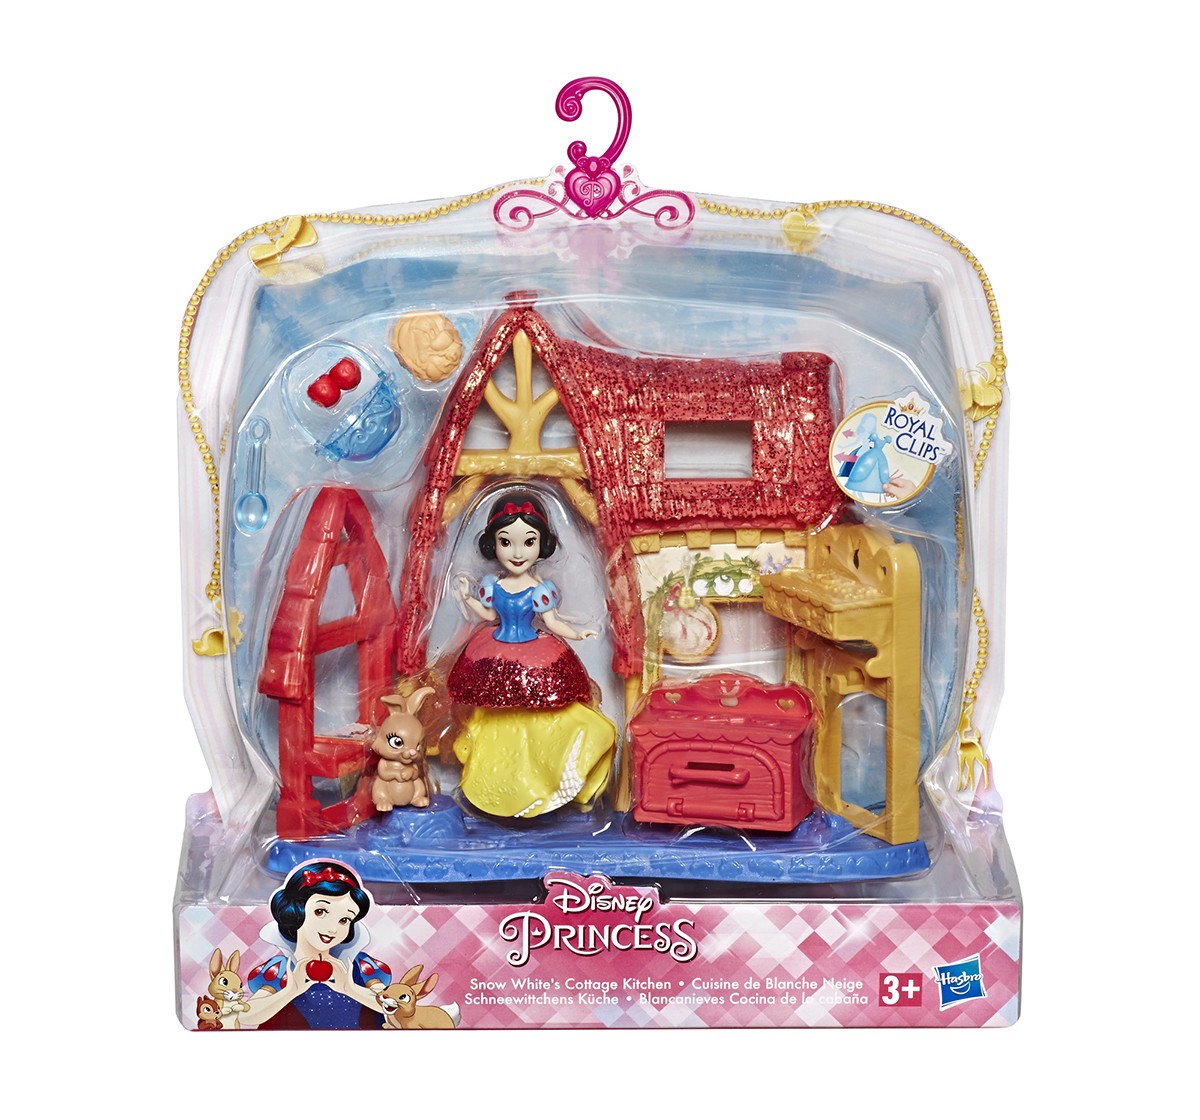 Disney Princess Cottage Kitchen And Snow White Doll Dolls & Accessories for age 3Y+ 